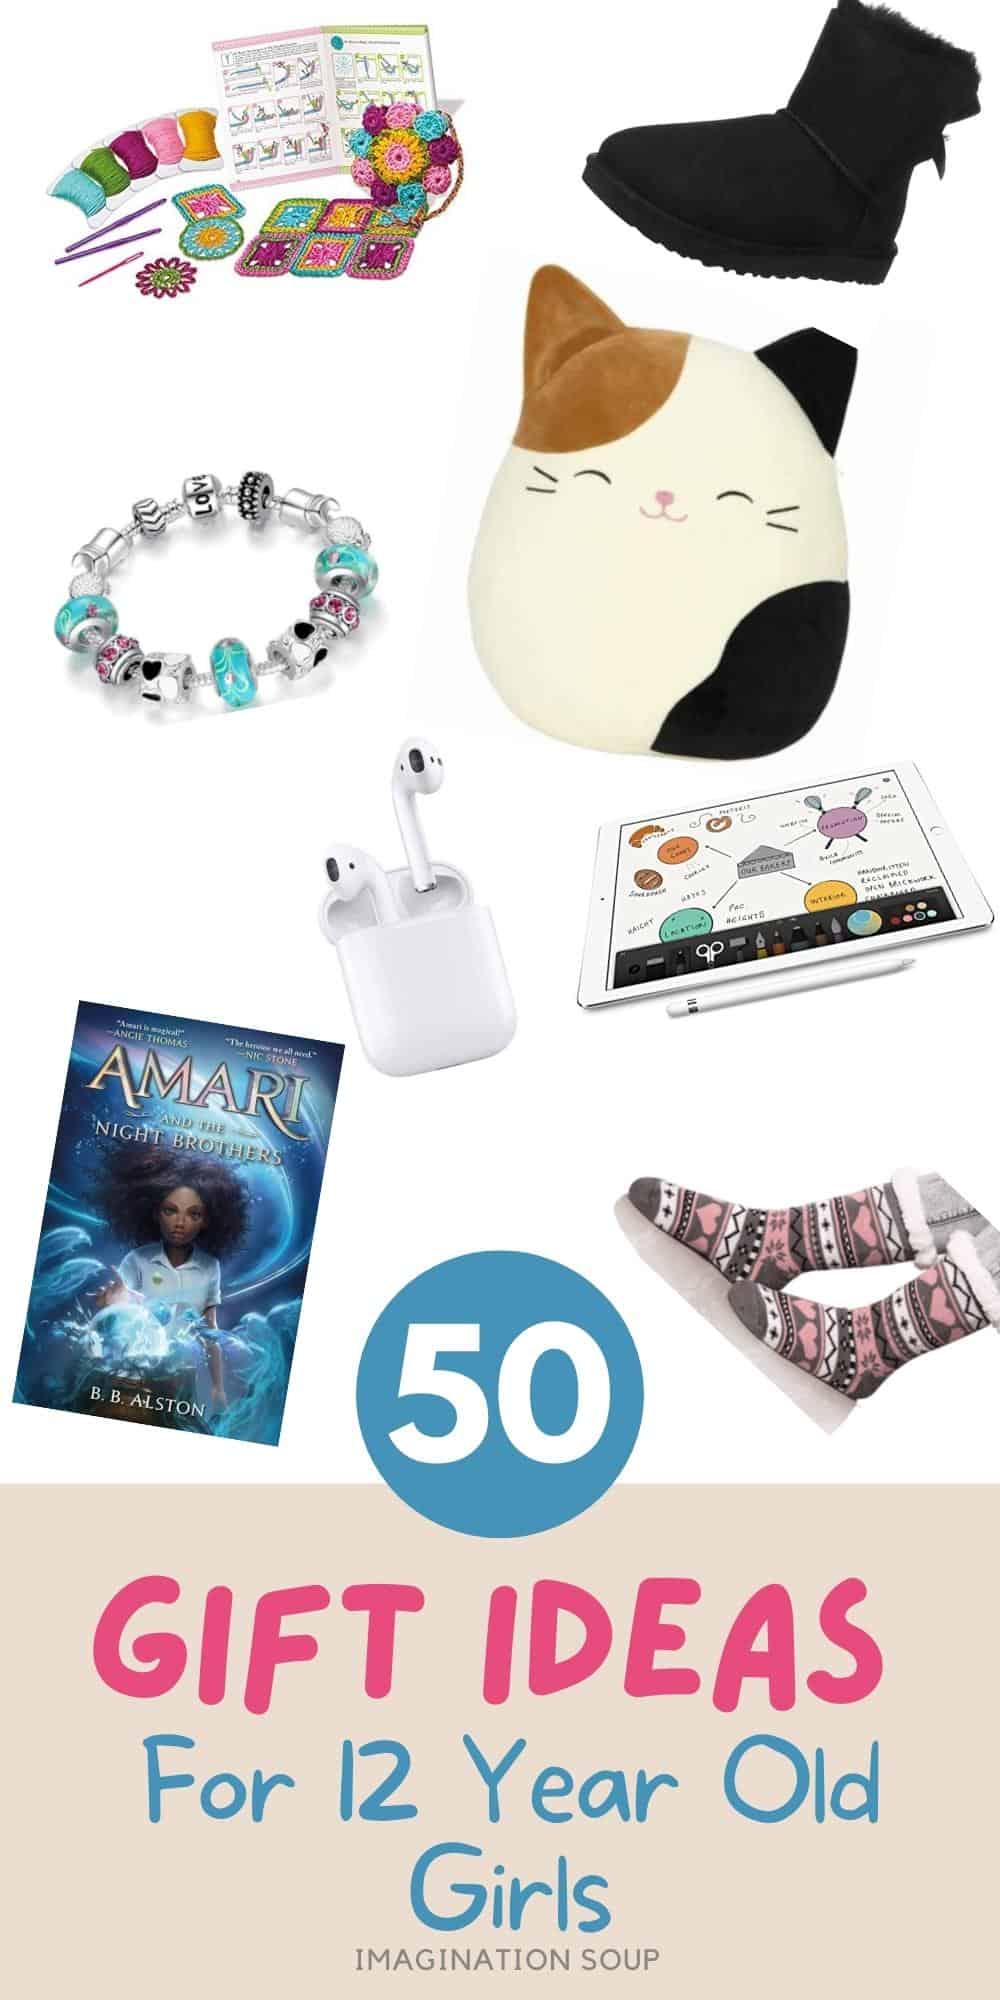 50 gift ideas for 12 year old girls